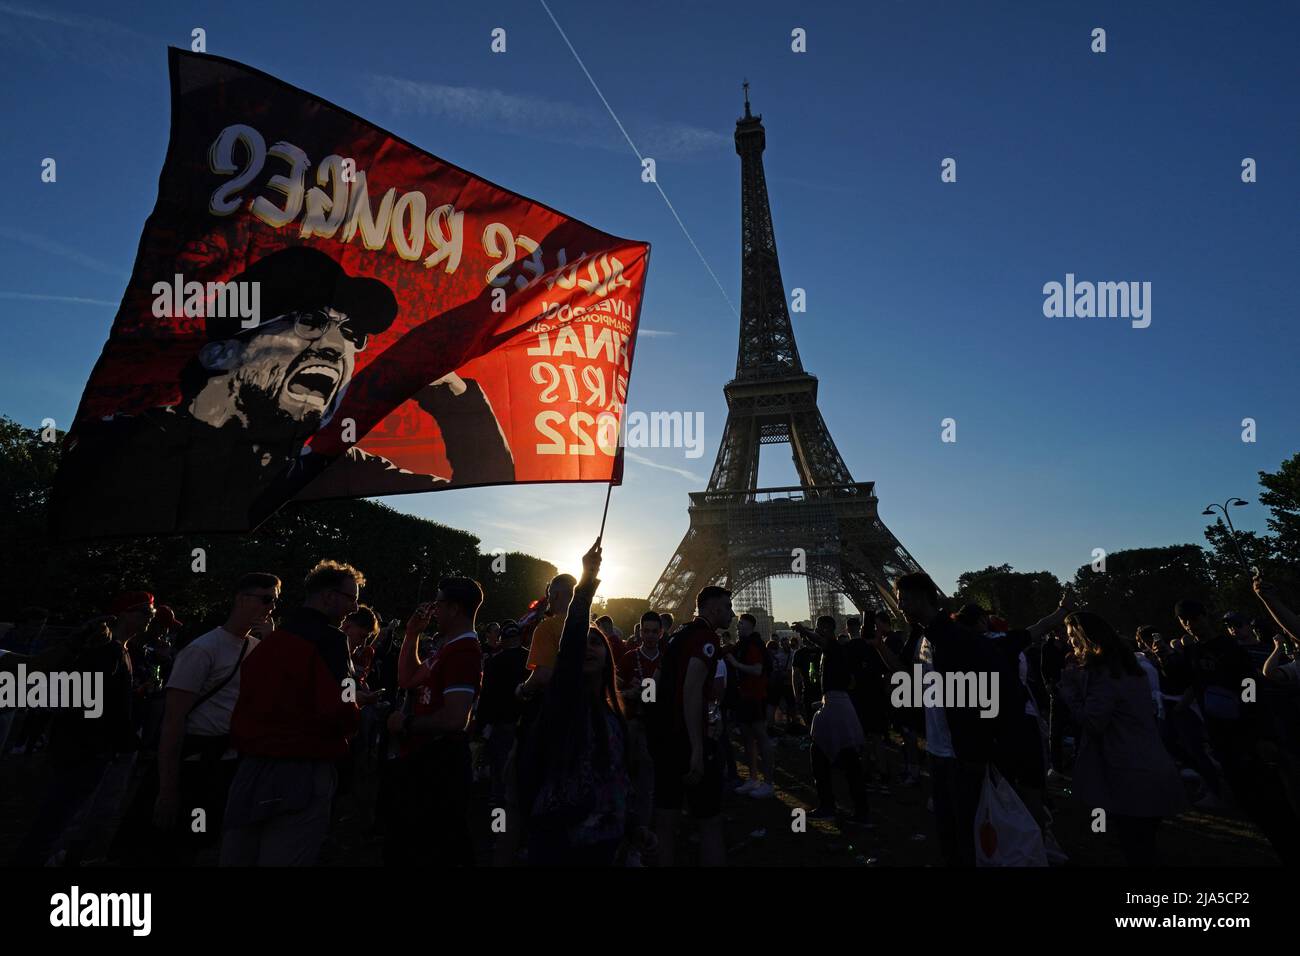 Football fans near the Eiffel Tower in Paris ahead of Saturday's UEFA Champions League Final between Liverpool FC and Real Madrid at the Stade de France, in Paris France. Picture date: Friday May 27, 2022. Stock Photo